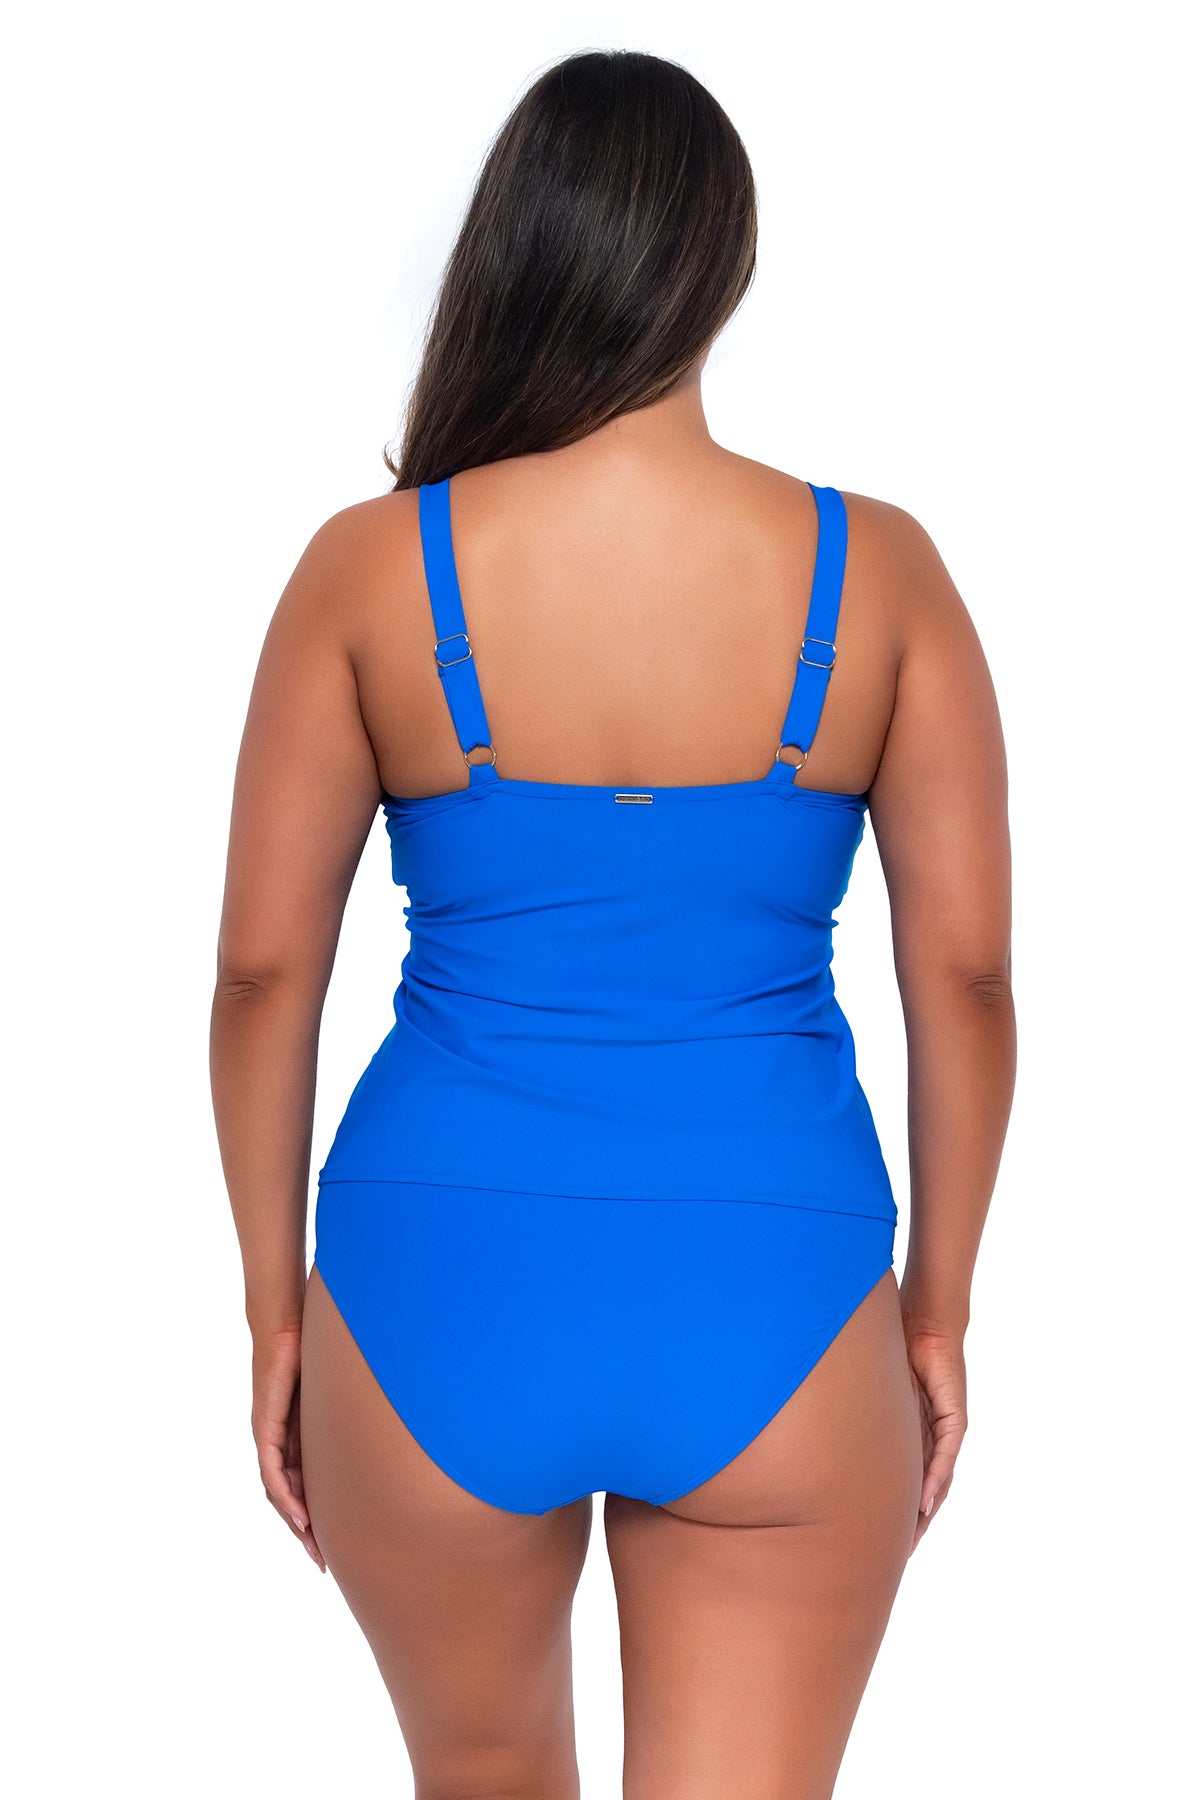 Back pose #1 of Nicky wearing Sunsets Electric Blue Forever Tankini Top with matching Hannah High Waist bikini bottom